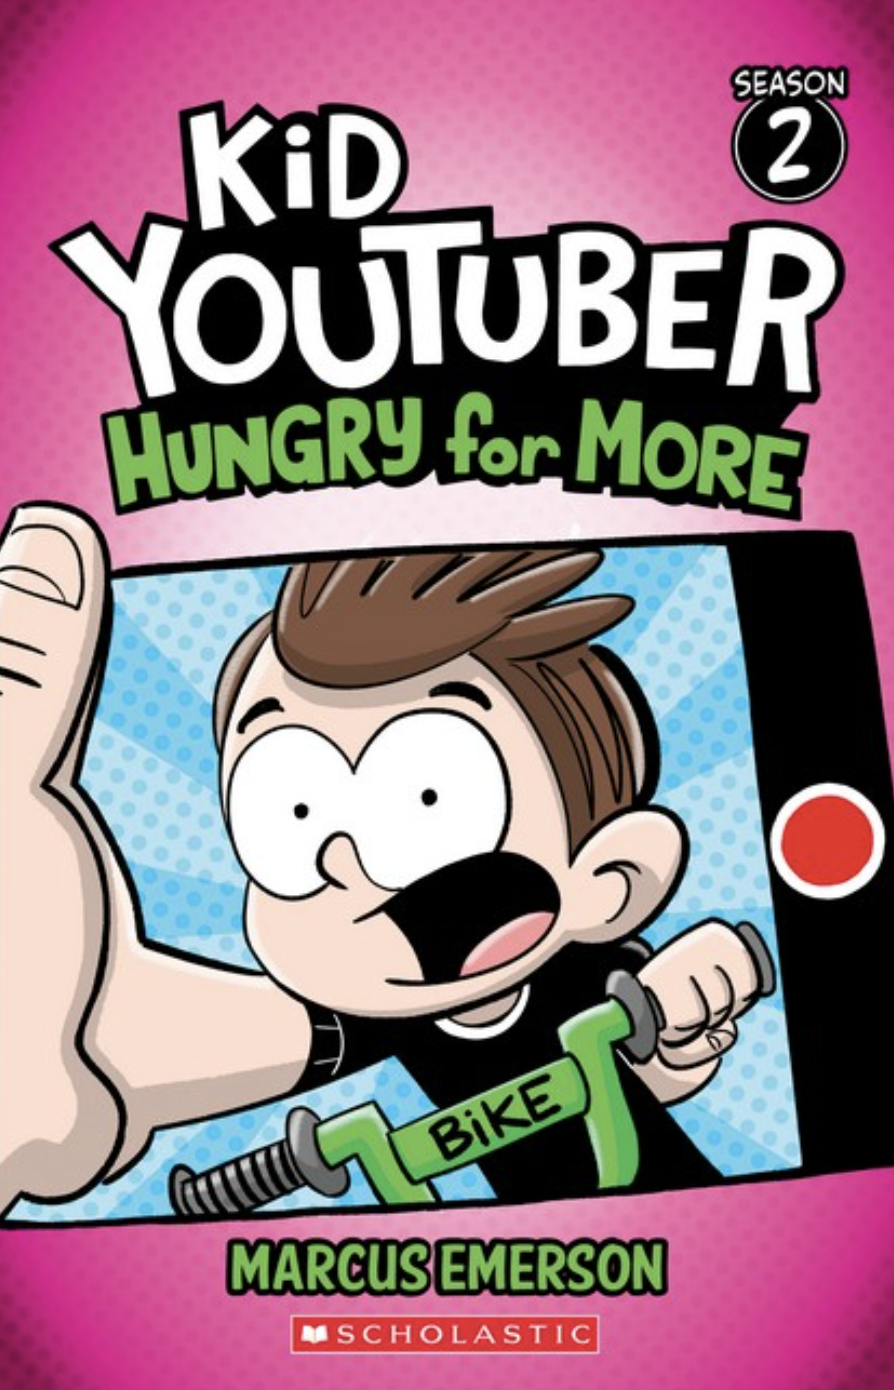 Hungry for More (Kid YouTuber: Season 2) - Marcus Emerson